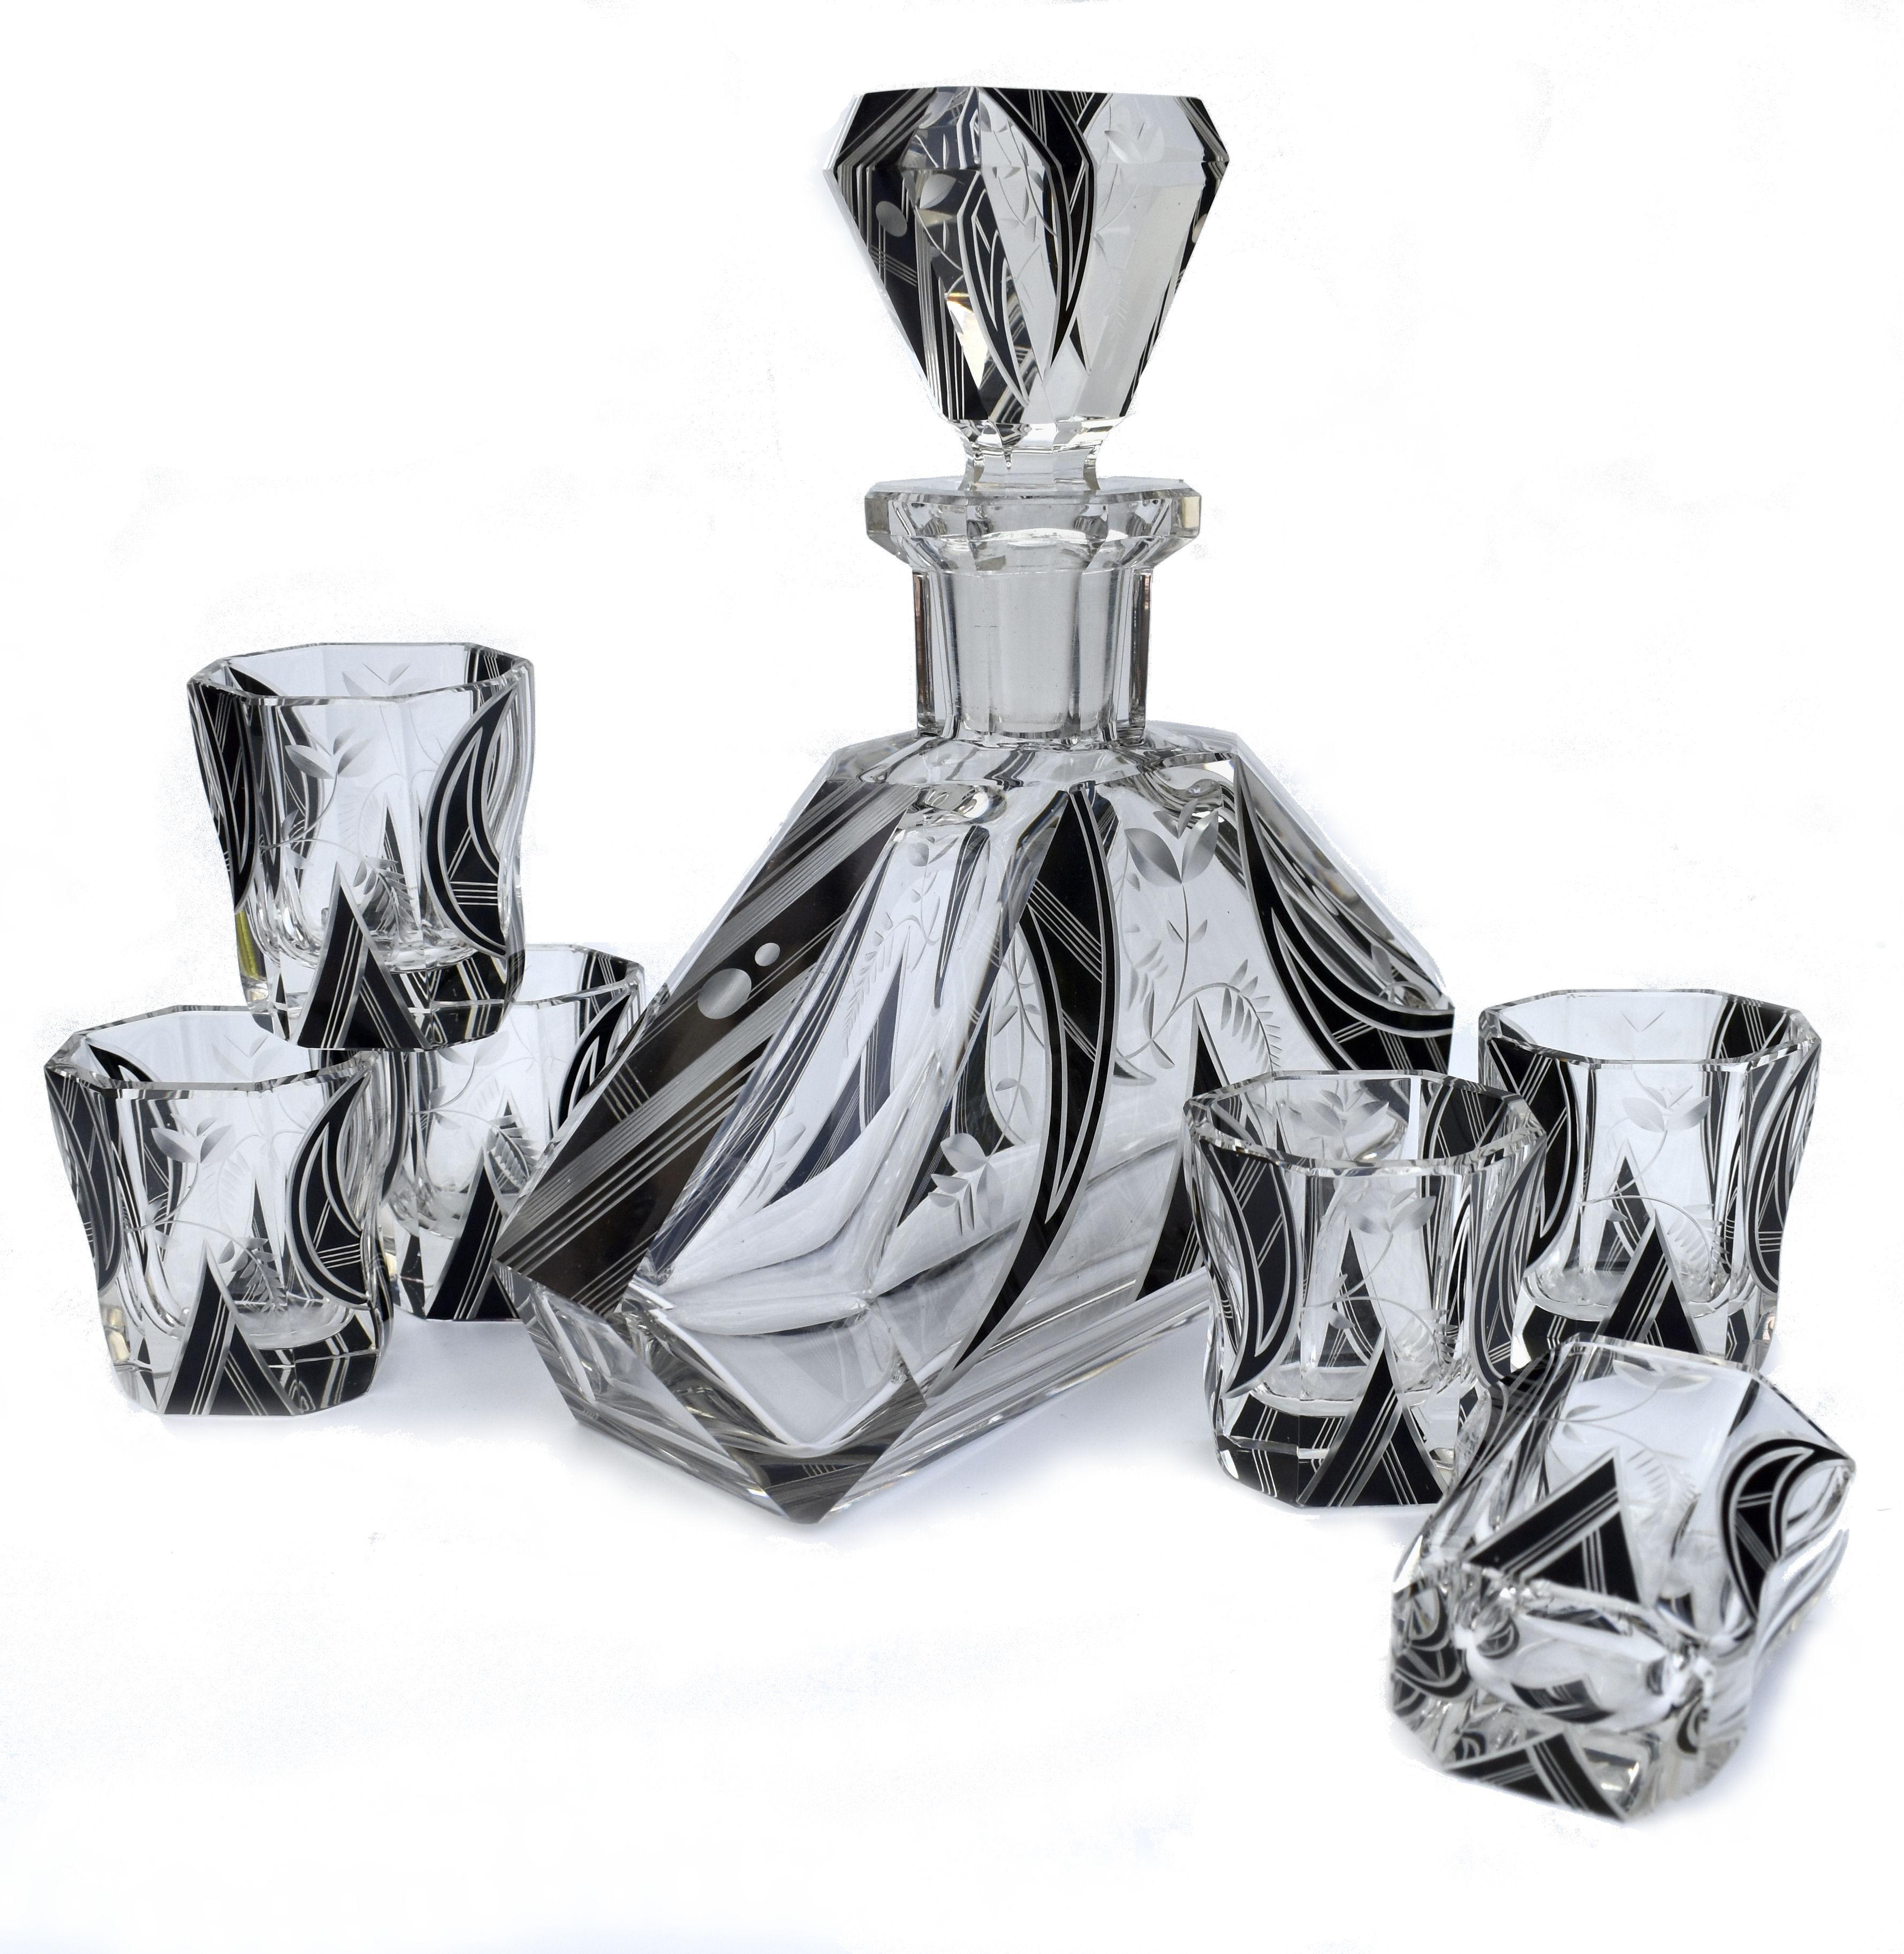 Czech Art Deco Karl Palda Glass Decanter Set with 6 Matching Glasses, circa 1930 For Sale